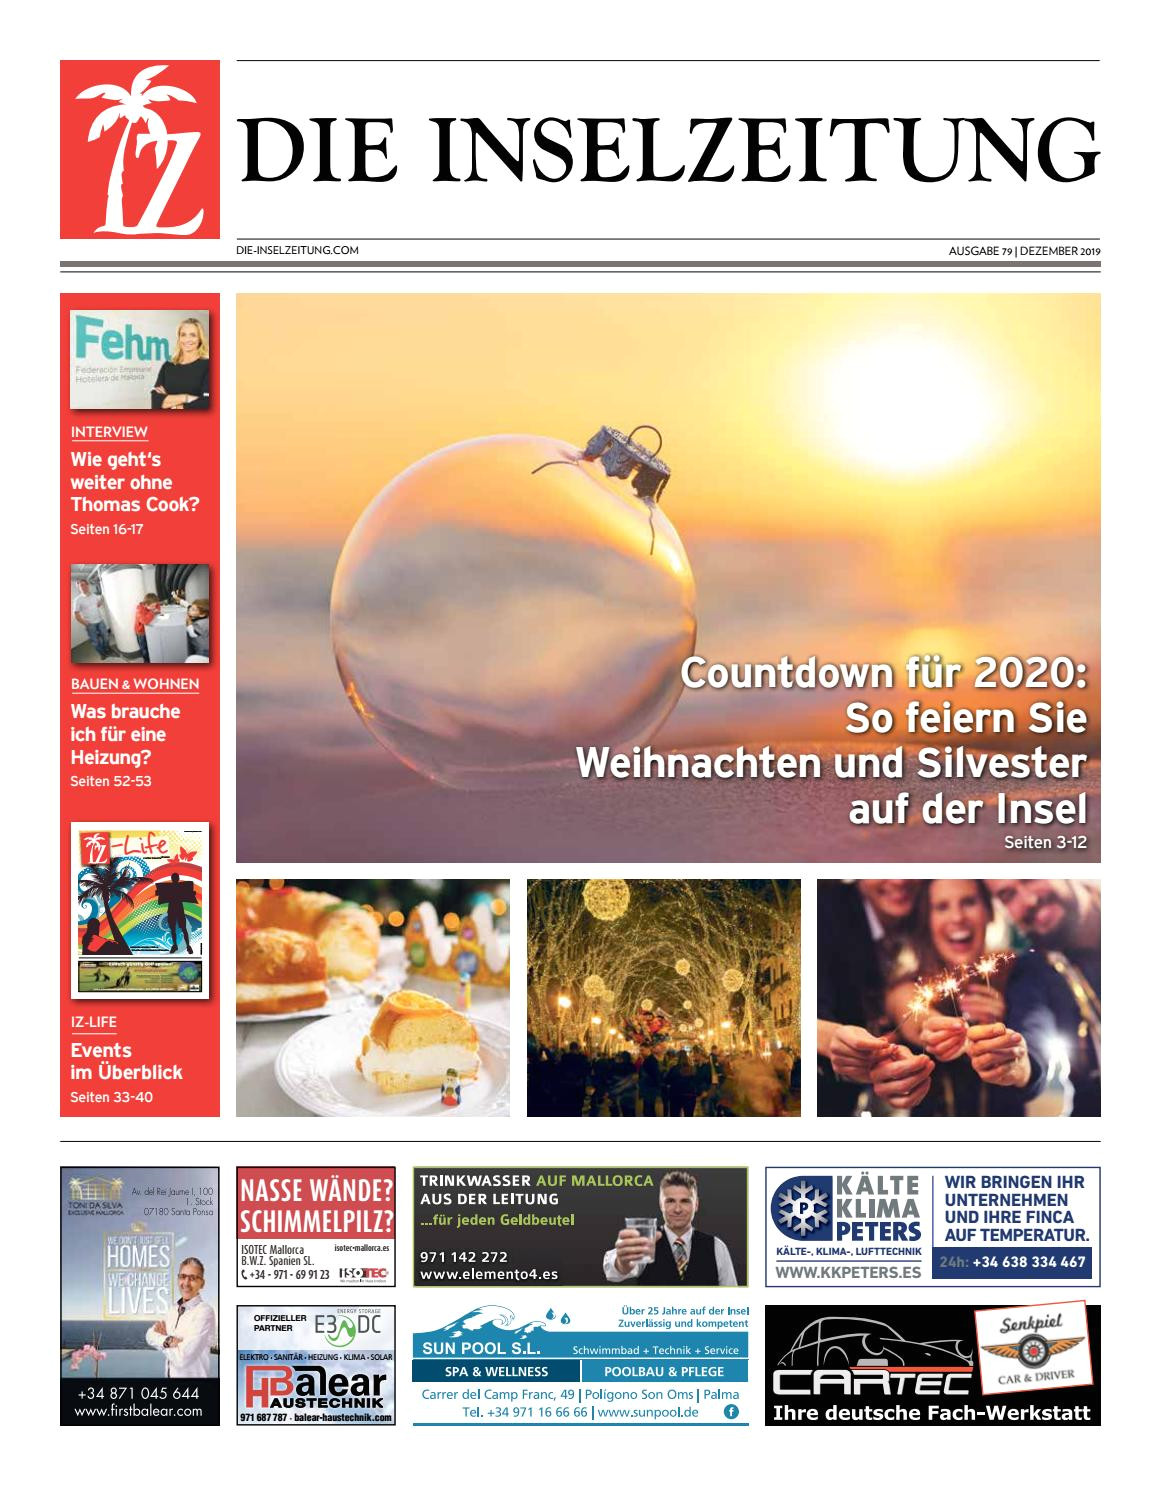 Diners Club Professional Card Application Die Inselzeitung Mallorca Dezember 2019 by Die Inselzeitung